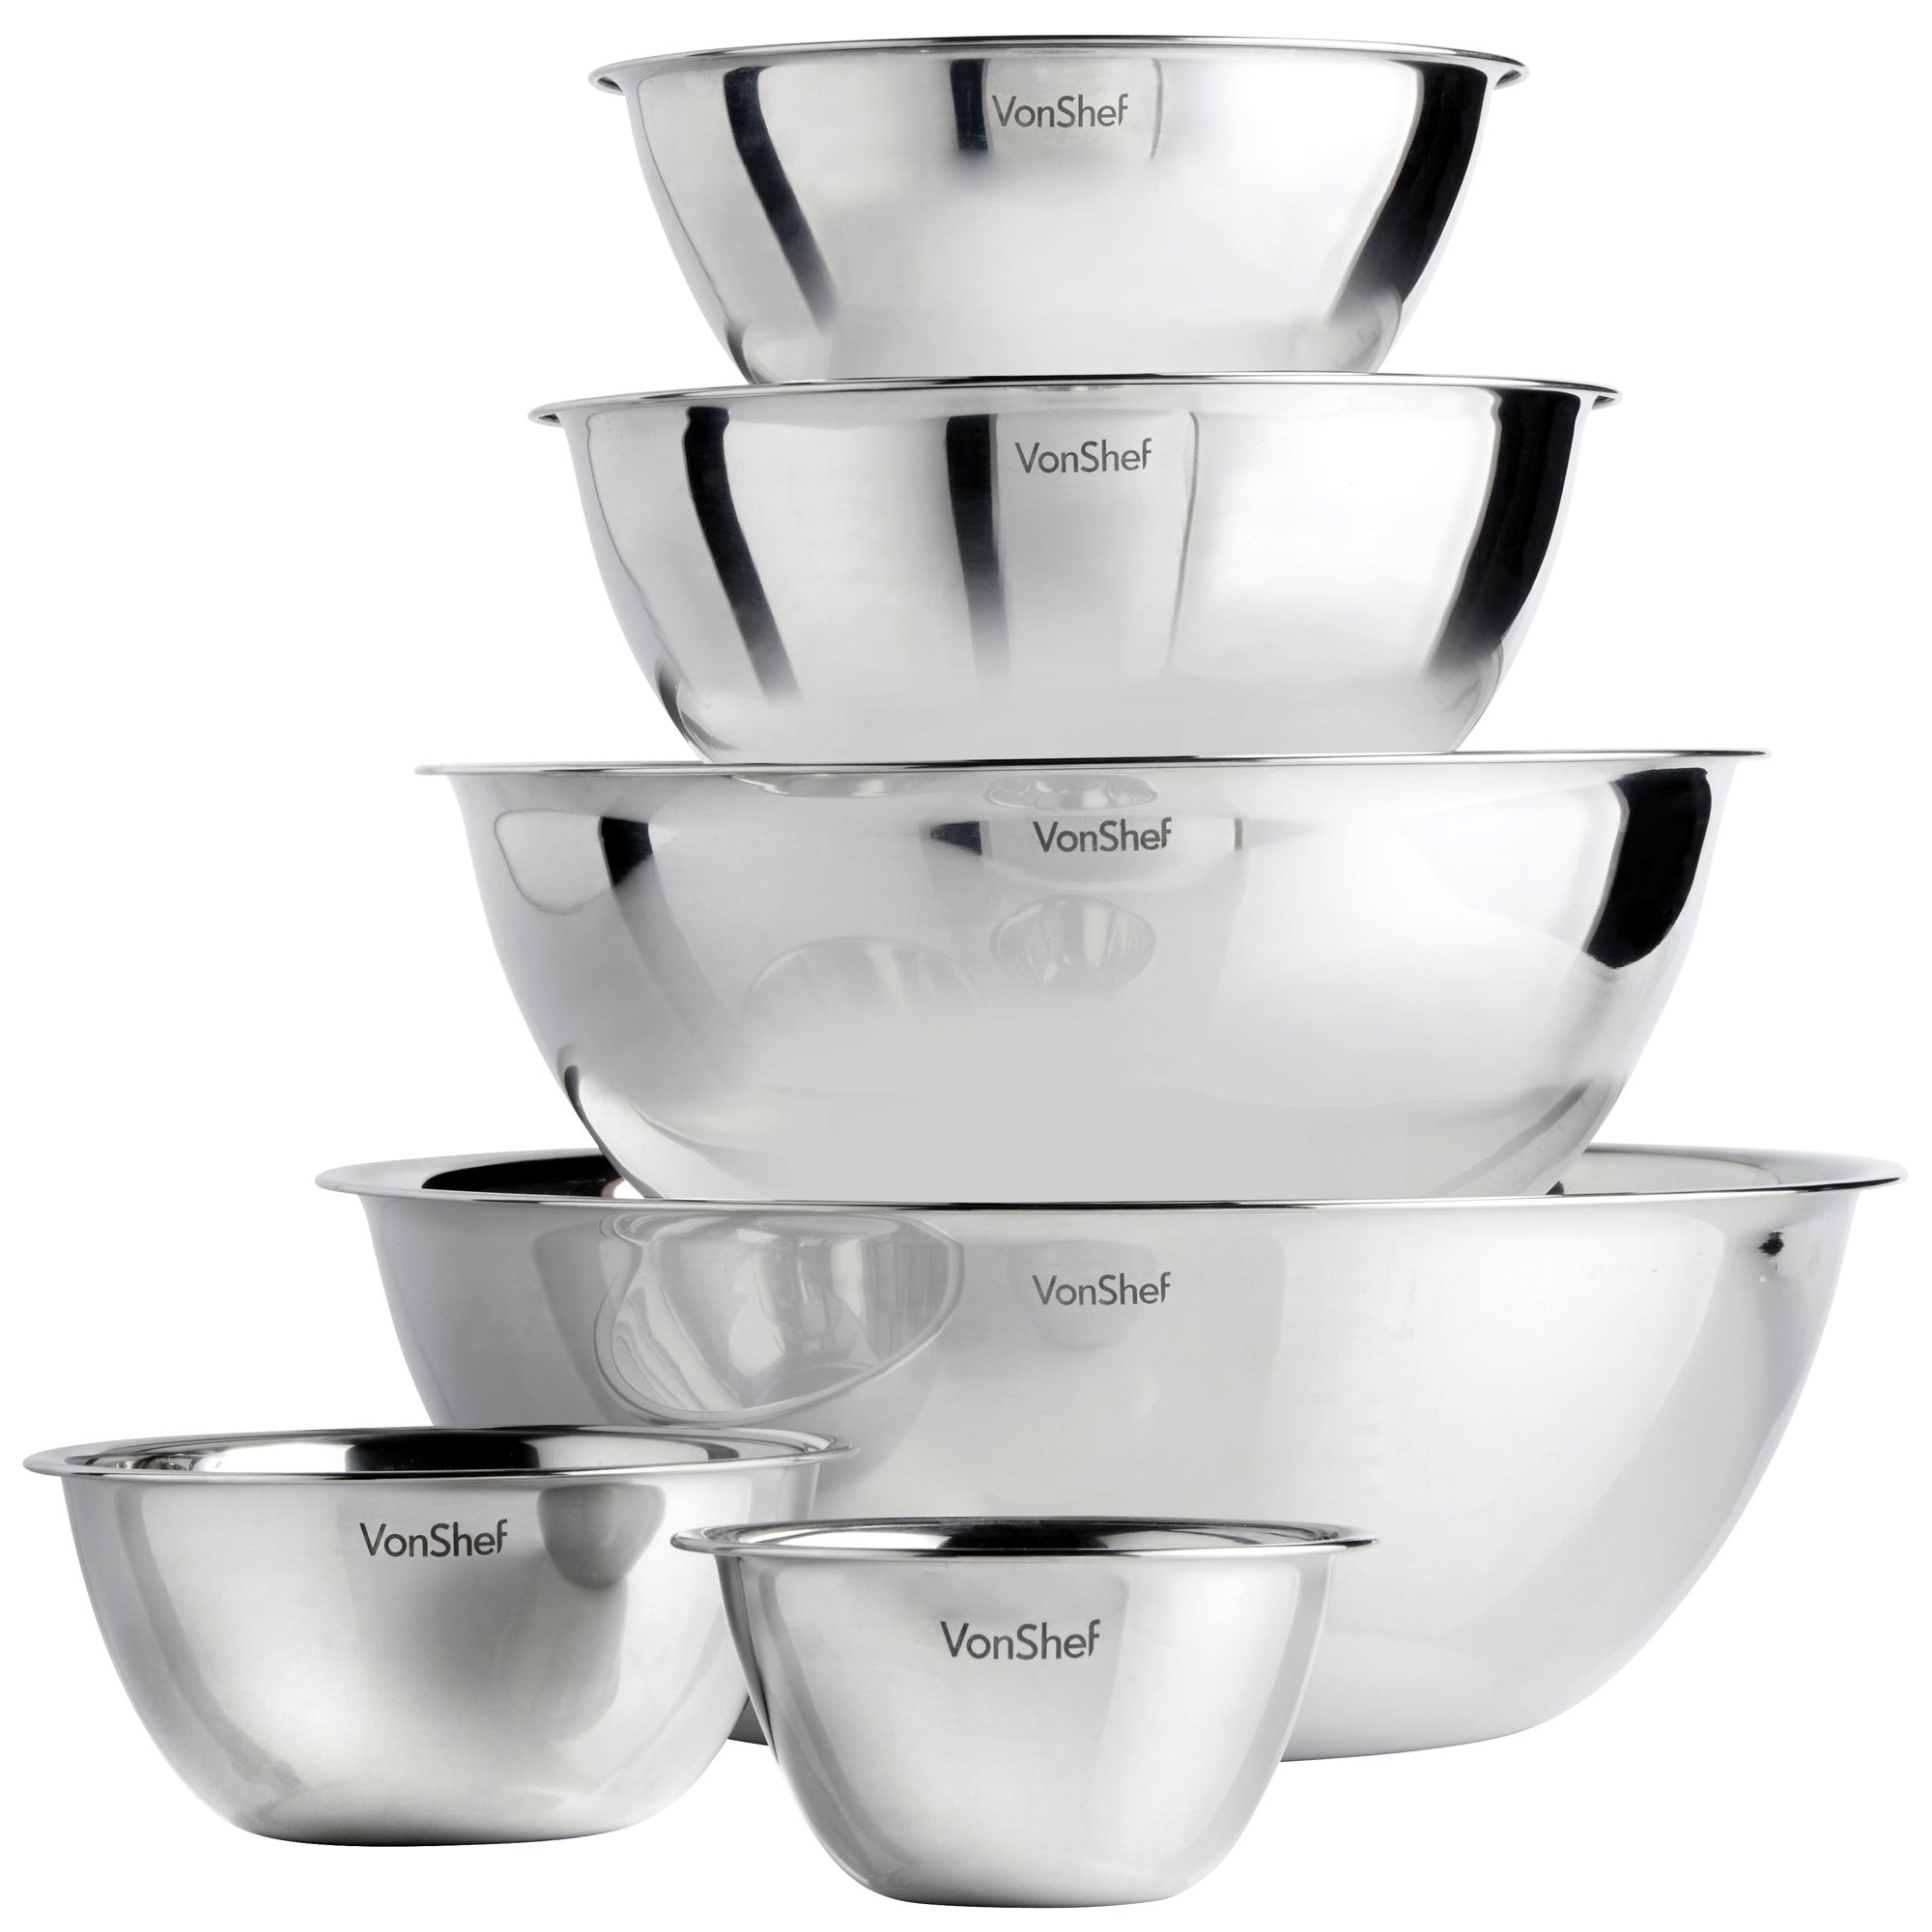 large stainless steel mixing bowls uk